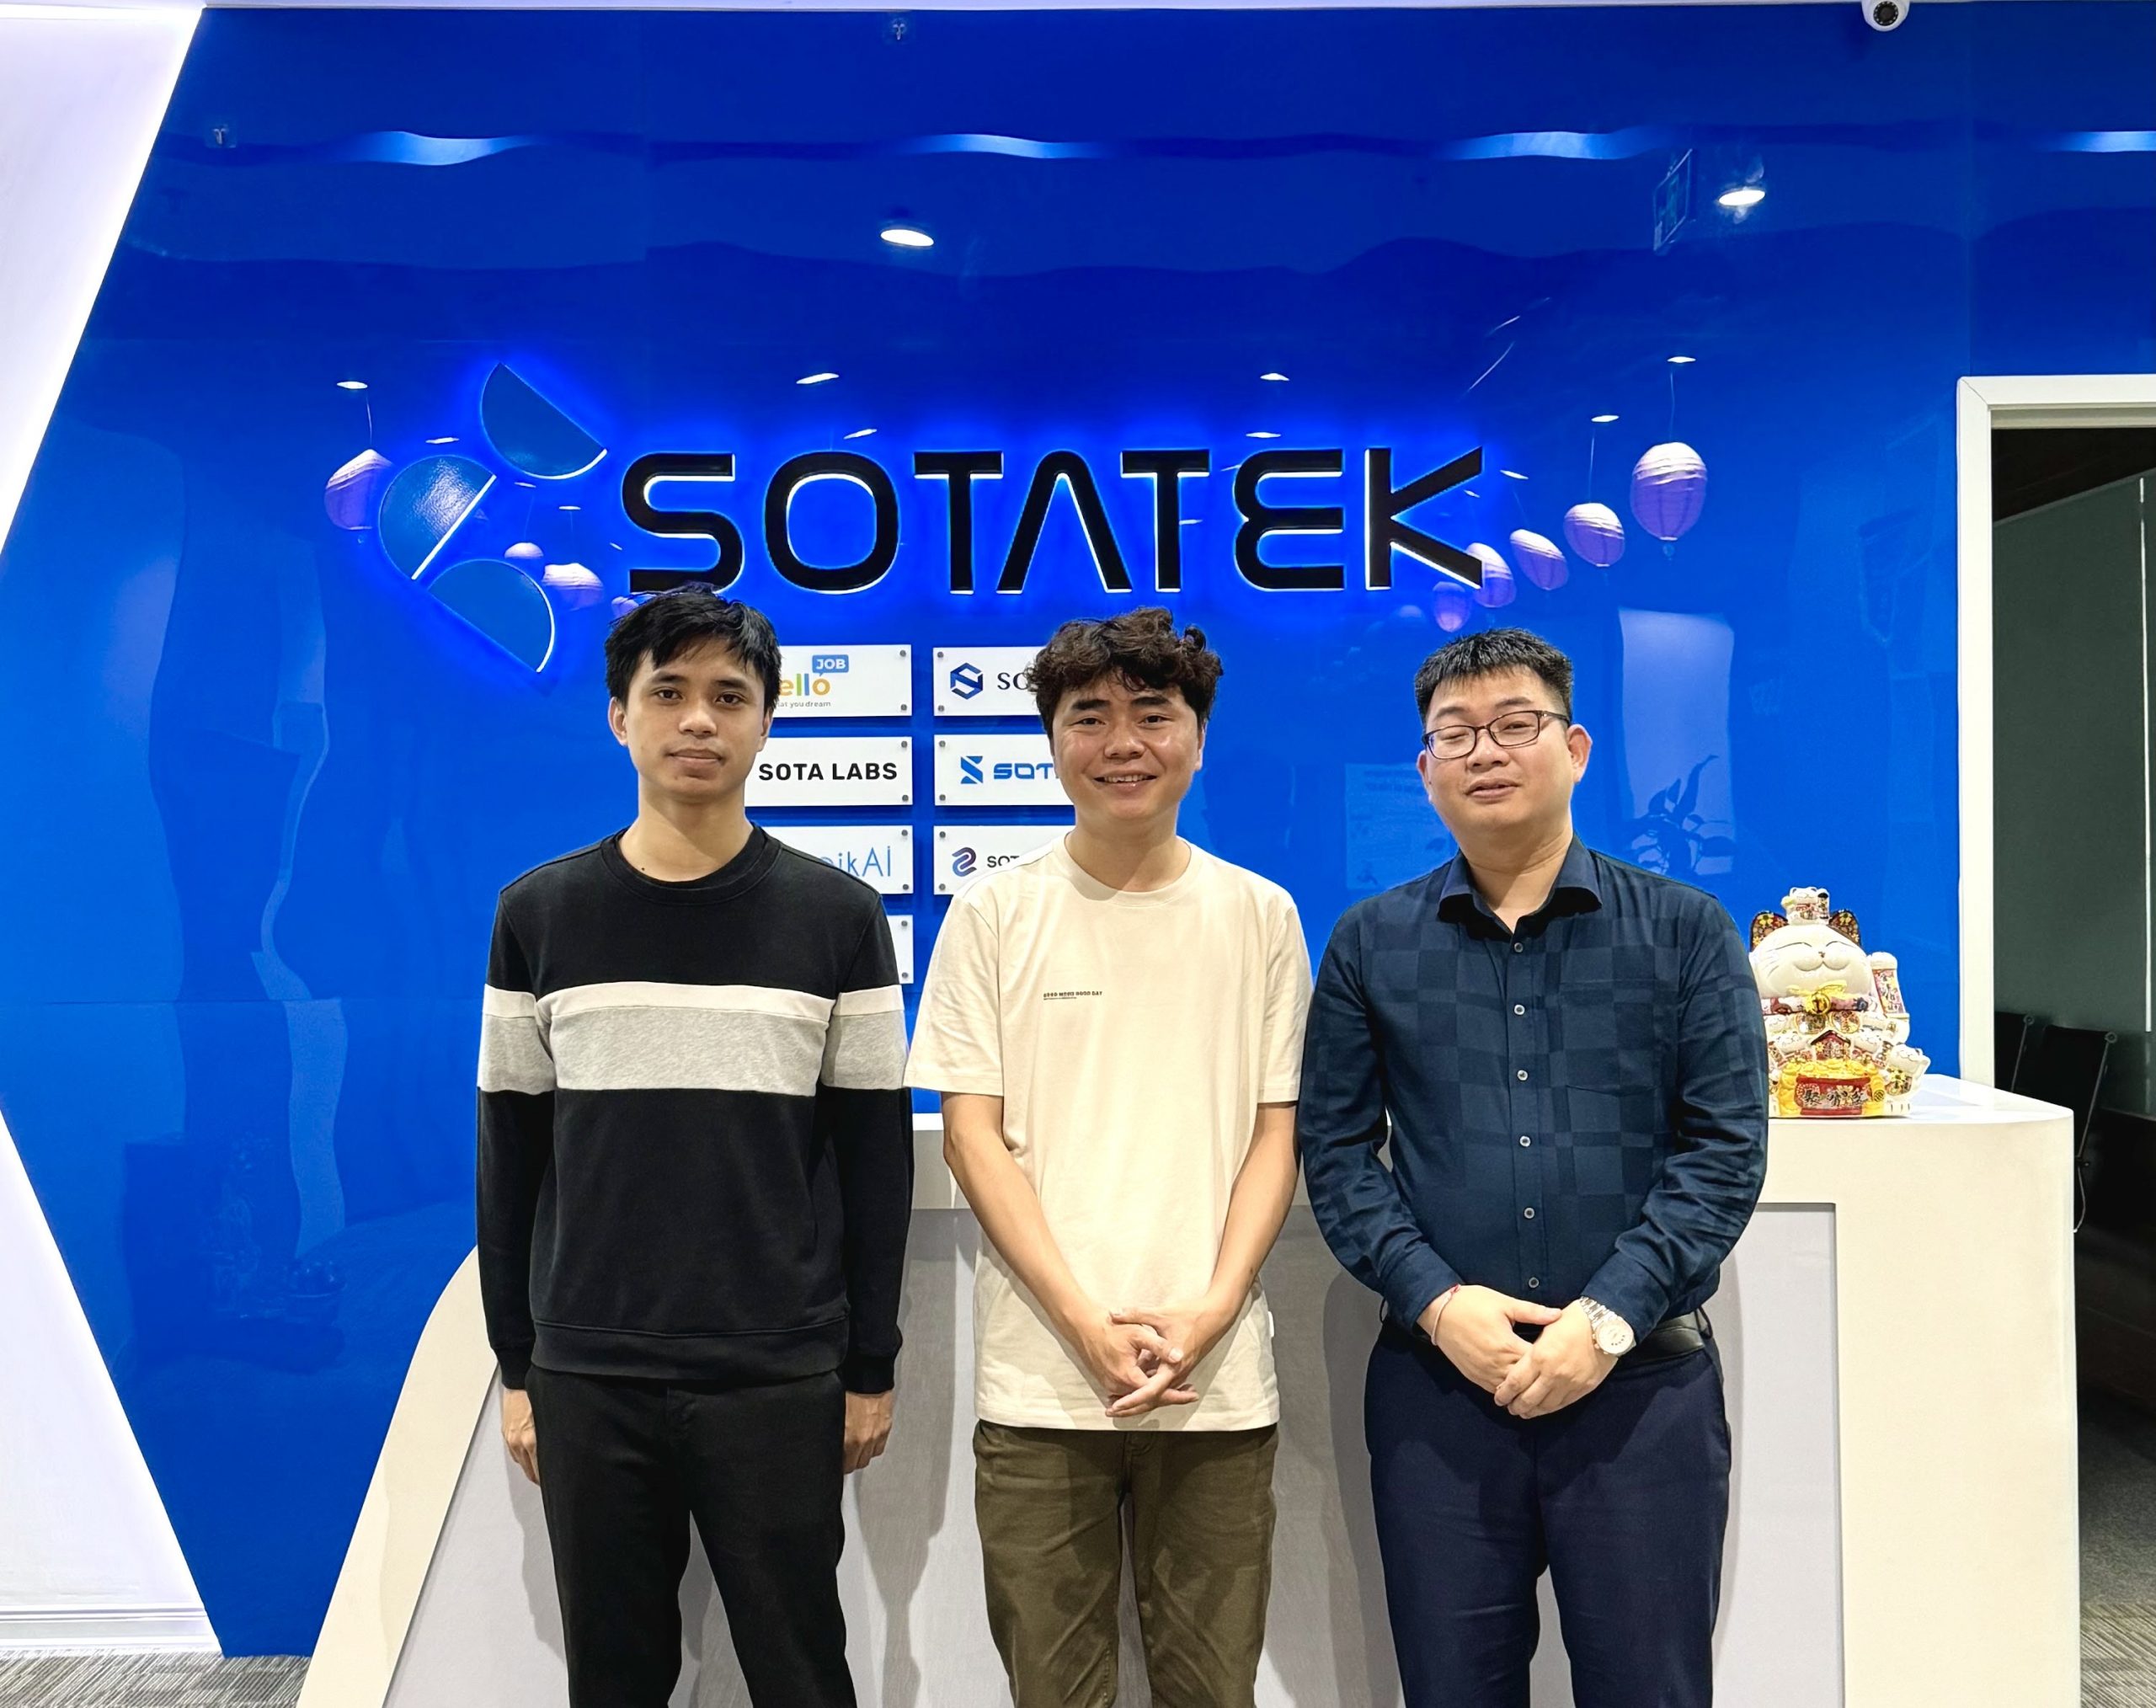 Warm meeting to discuss the ZK technology between SotaTek and Orochi